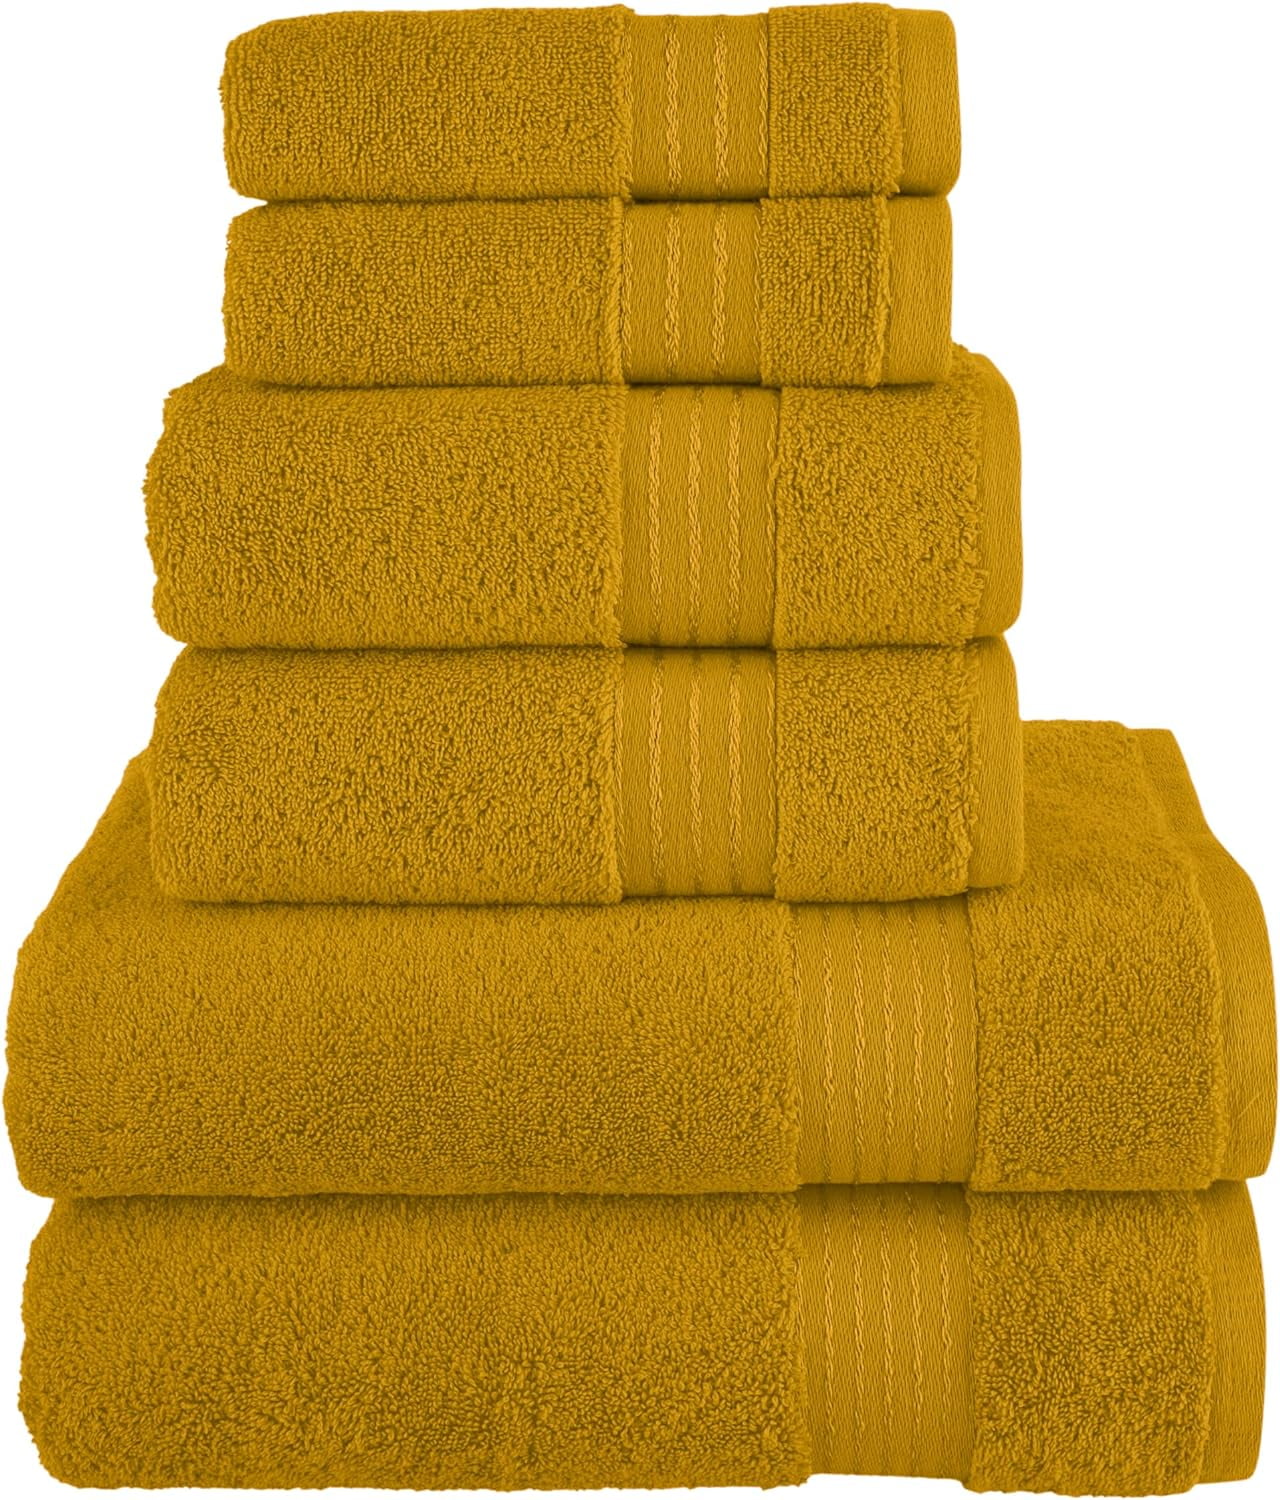  American Veteran Towel, Towels for Bathroom, 6 Piece Towel Sets  for Clearance Prime, 100% Turkish Cotton Bathroom Towels, 2 Bath Towels 2  Hand Towels 2 Washcloths, Yellow : Home & Kitchen